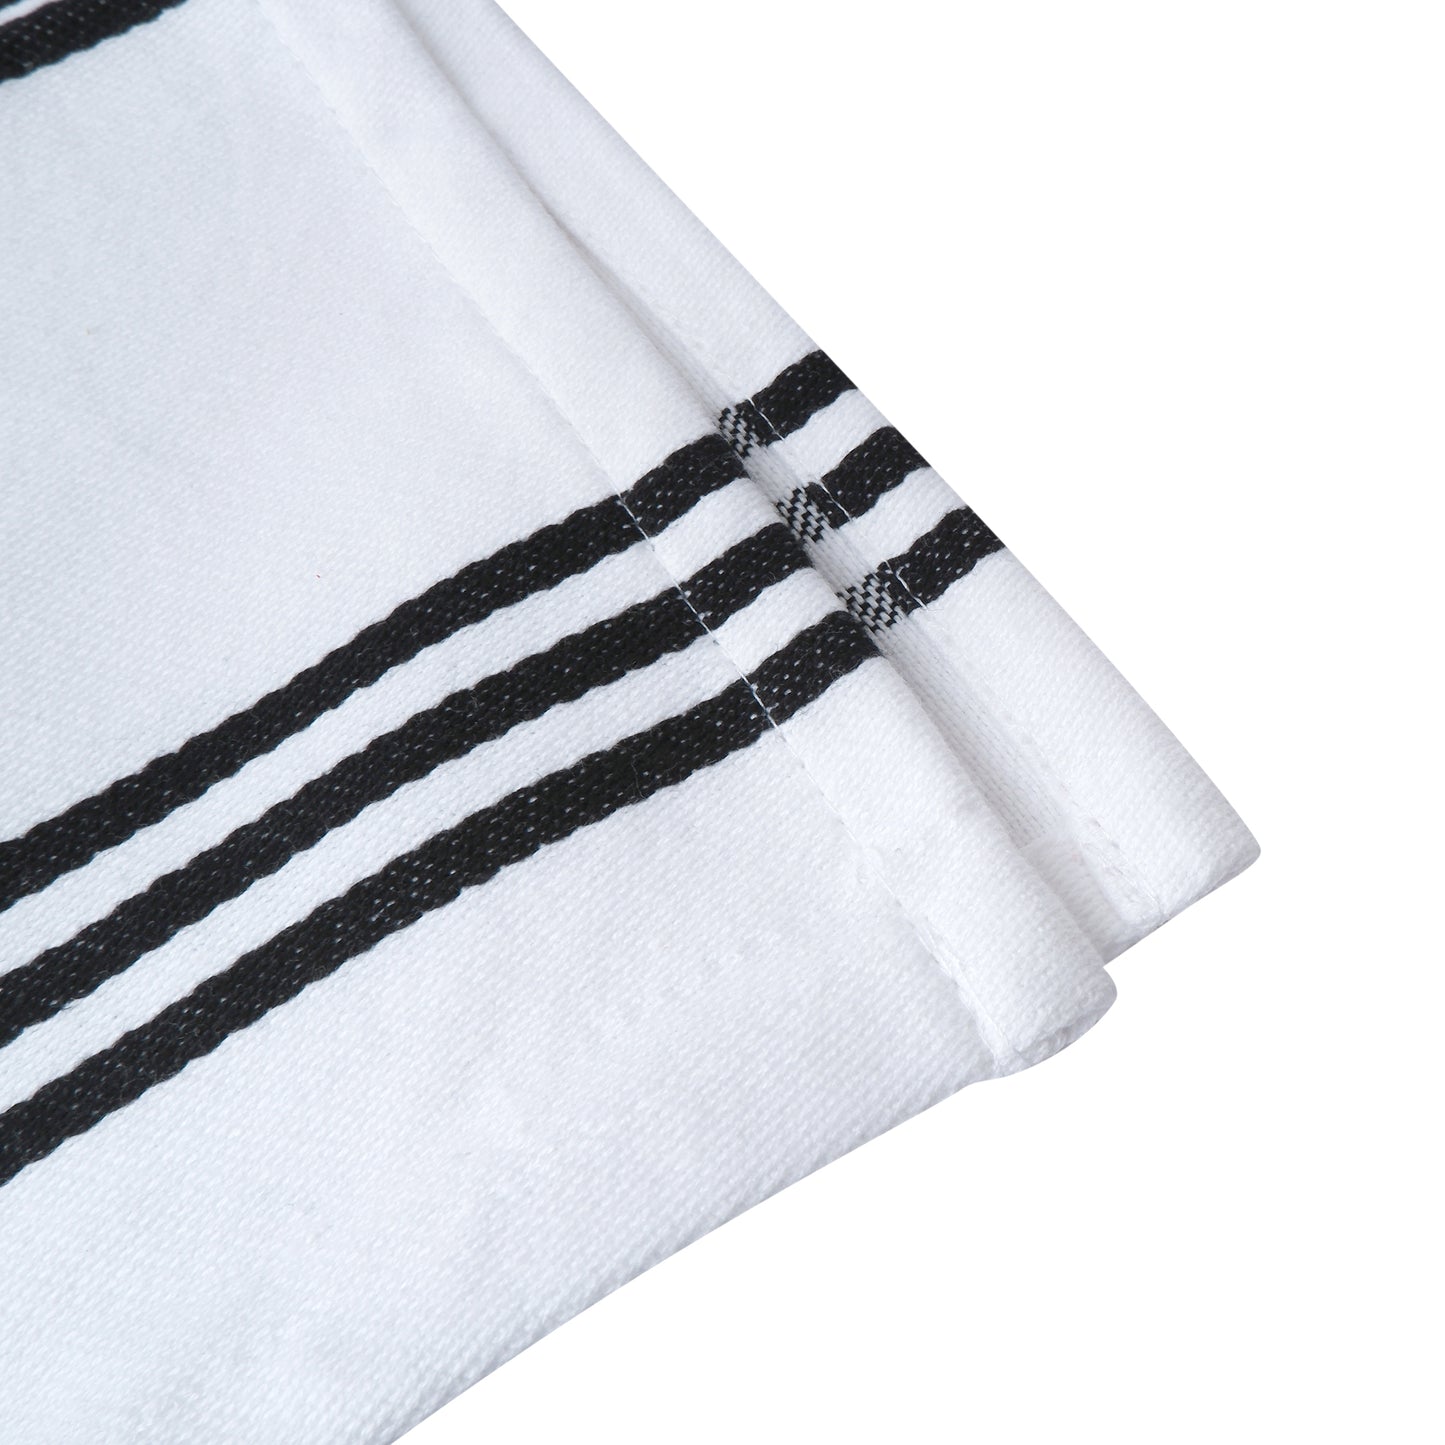 Set of 4 Striped 100% Cotton Dish Towels for Kitchen Tea Hand Towels 20x30 Inch Multi Color Options